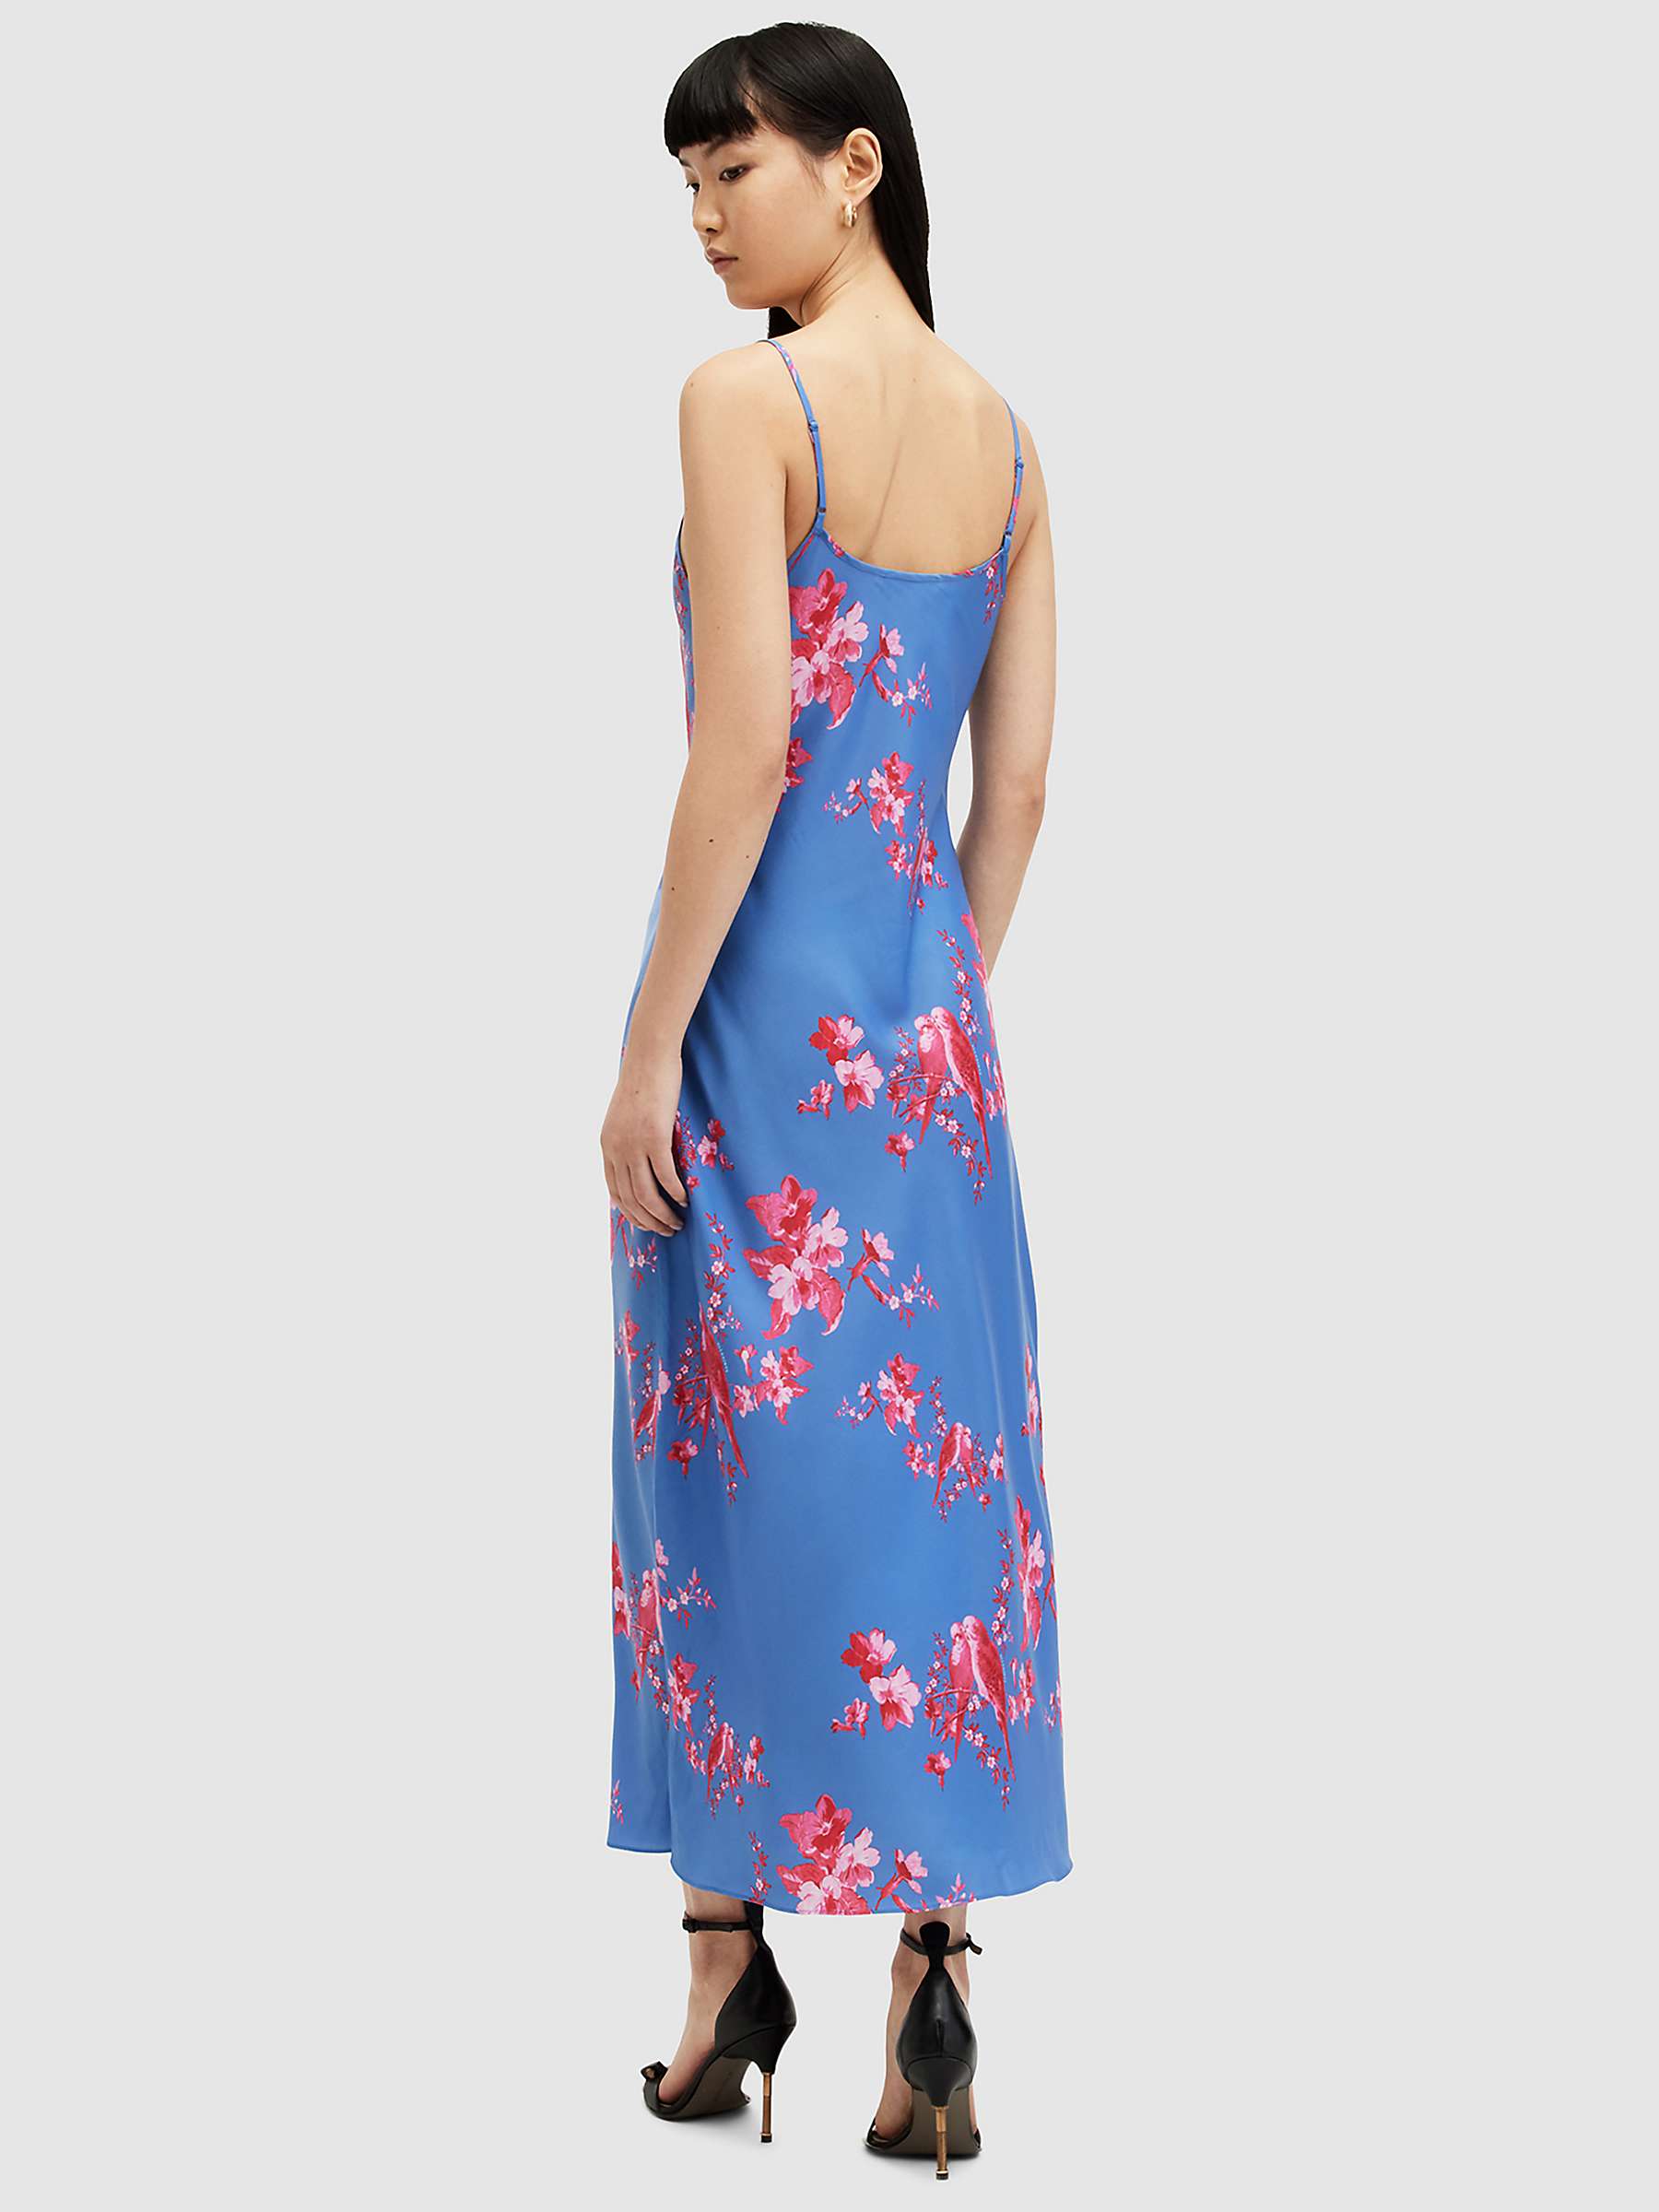 Buy AllSaints Bryony Iona Floral Midi Dress, Neon Pink/Blue Online at johnlewis.com